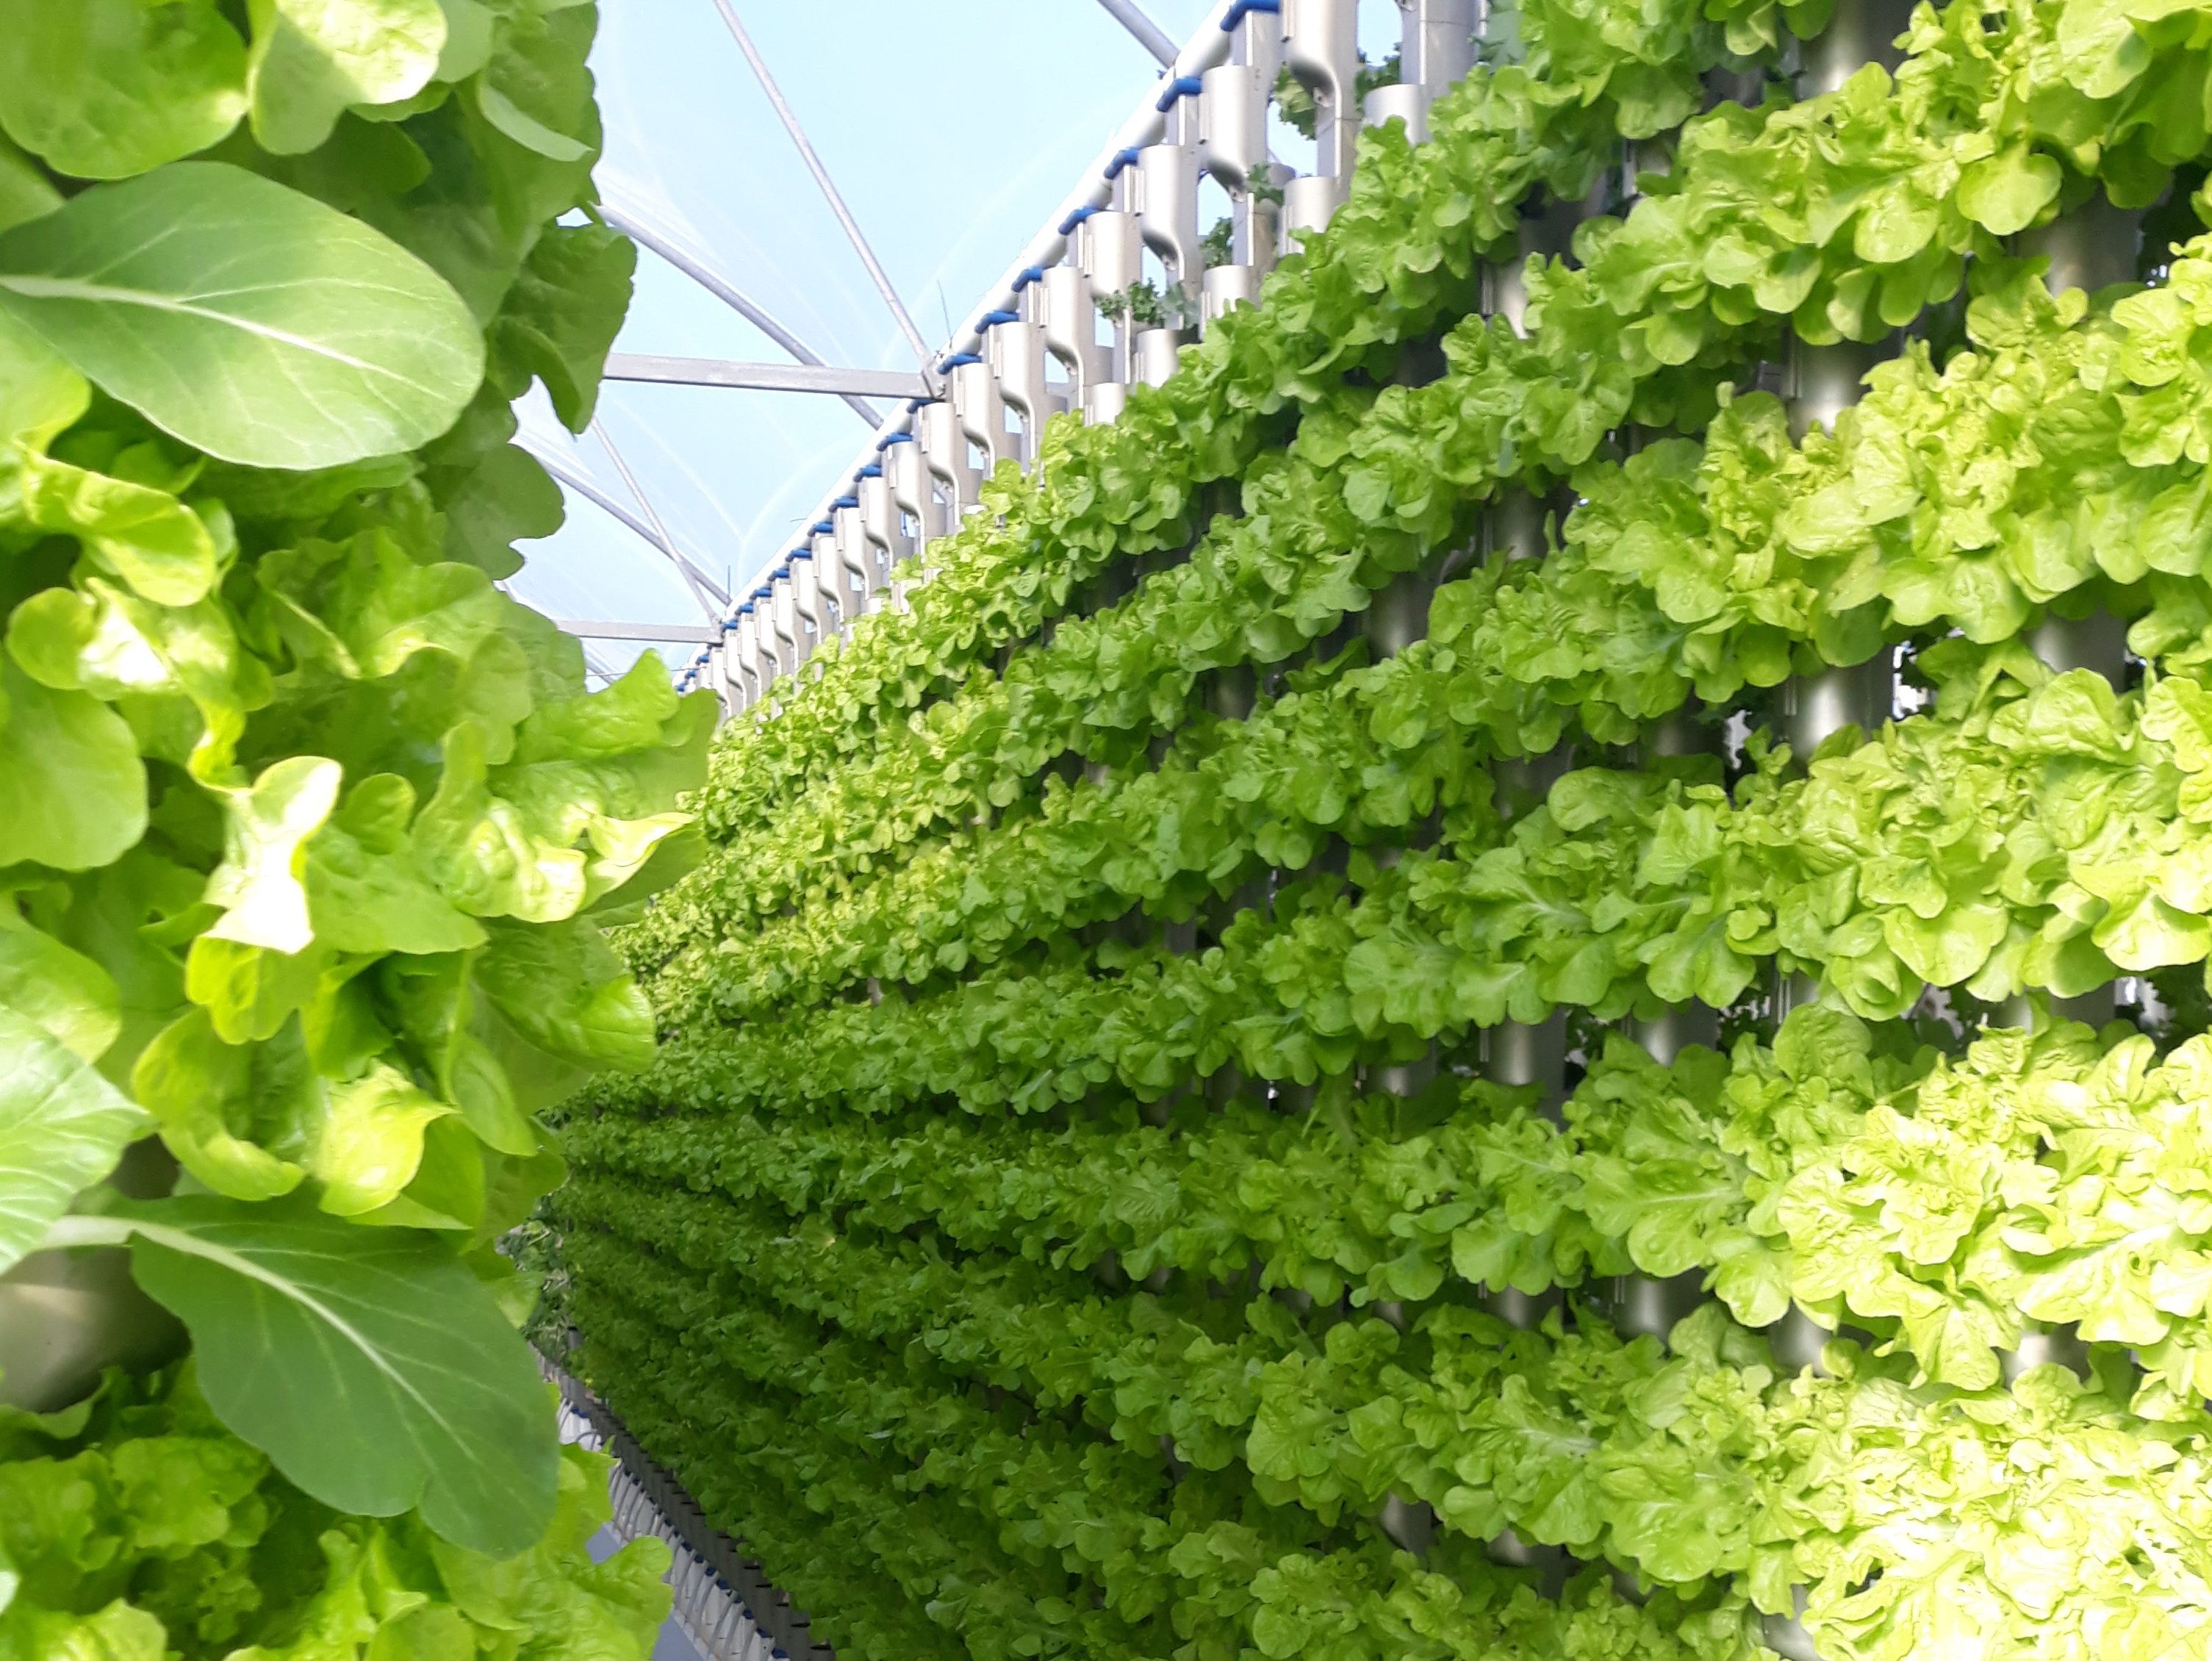 Australia’s peak industry body for fruit and vegetable growers has teamed with Sydney-based researchers and agricultural experts to explore the potential social, environmental and economic benefits of intensive indoor urban cropping systems.